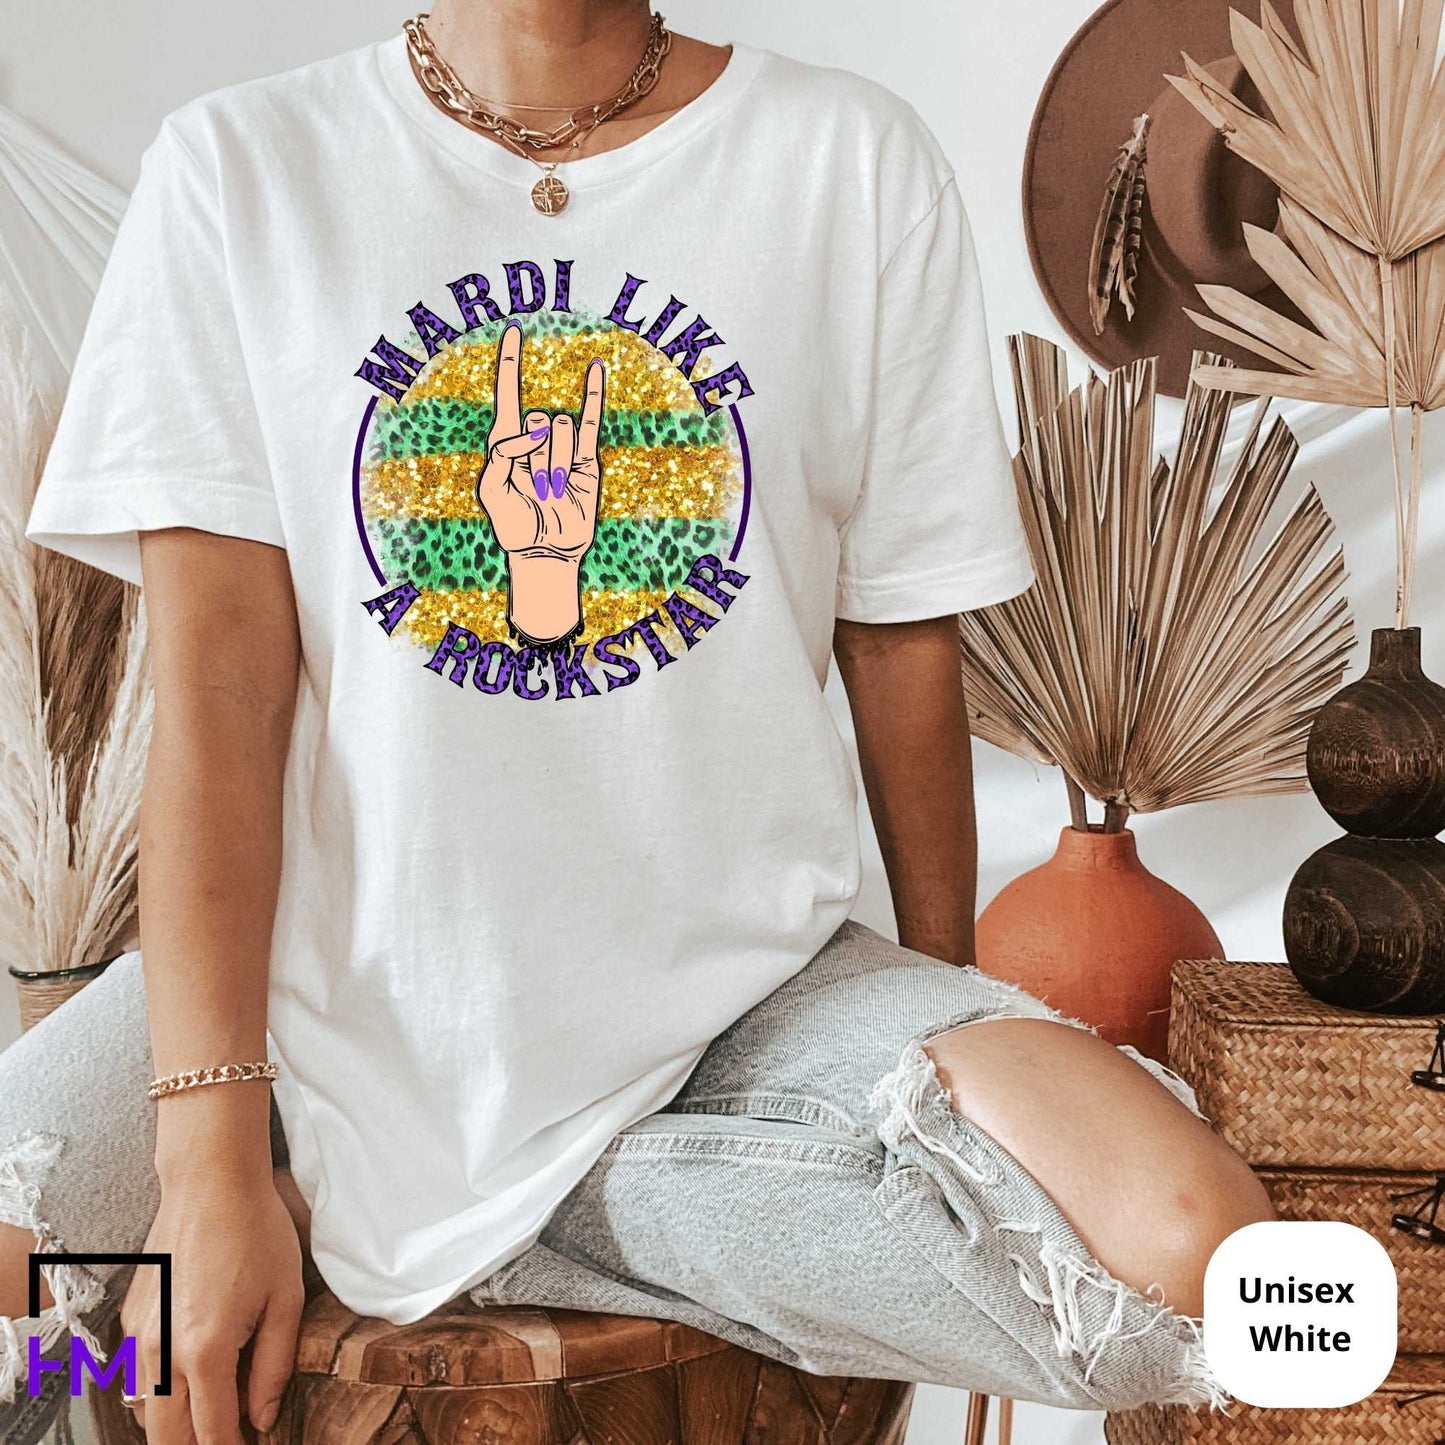 Mardi Like a Rockstar, Mardi Gras Shirt or Tank Top, Plus Sizes Available Up to 5XL